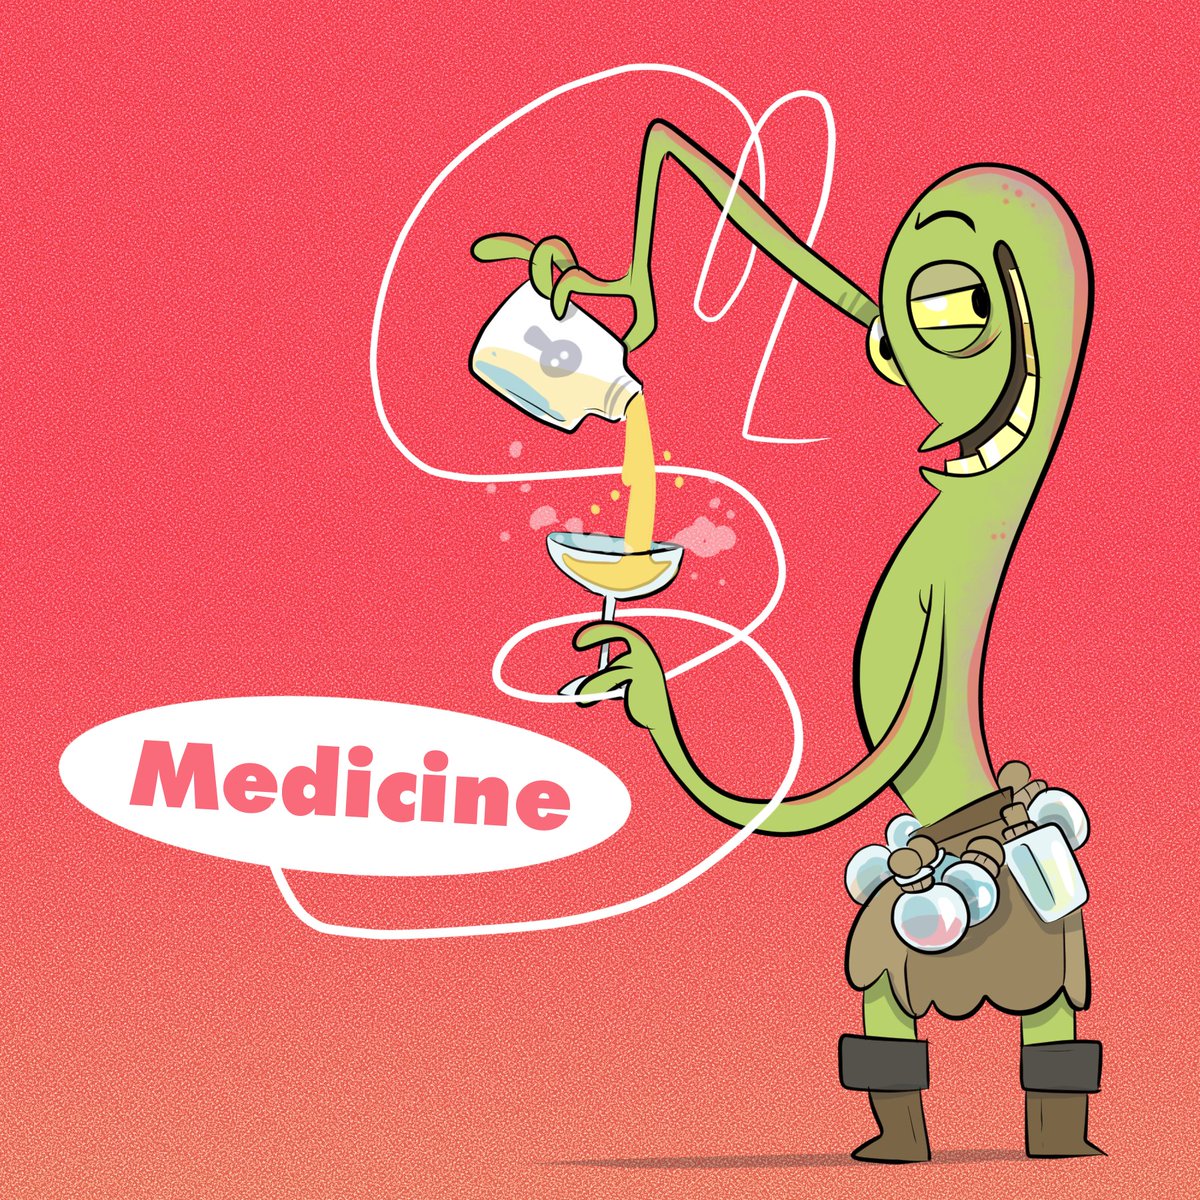 The word for this week’s #AnimalAlphabets is ‘Medicine’. I don't know if I would totally trust what this apothecary is offering though. @animalalphabets #characterdesign #medicine #art #sillydrawing #apothecary